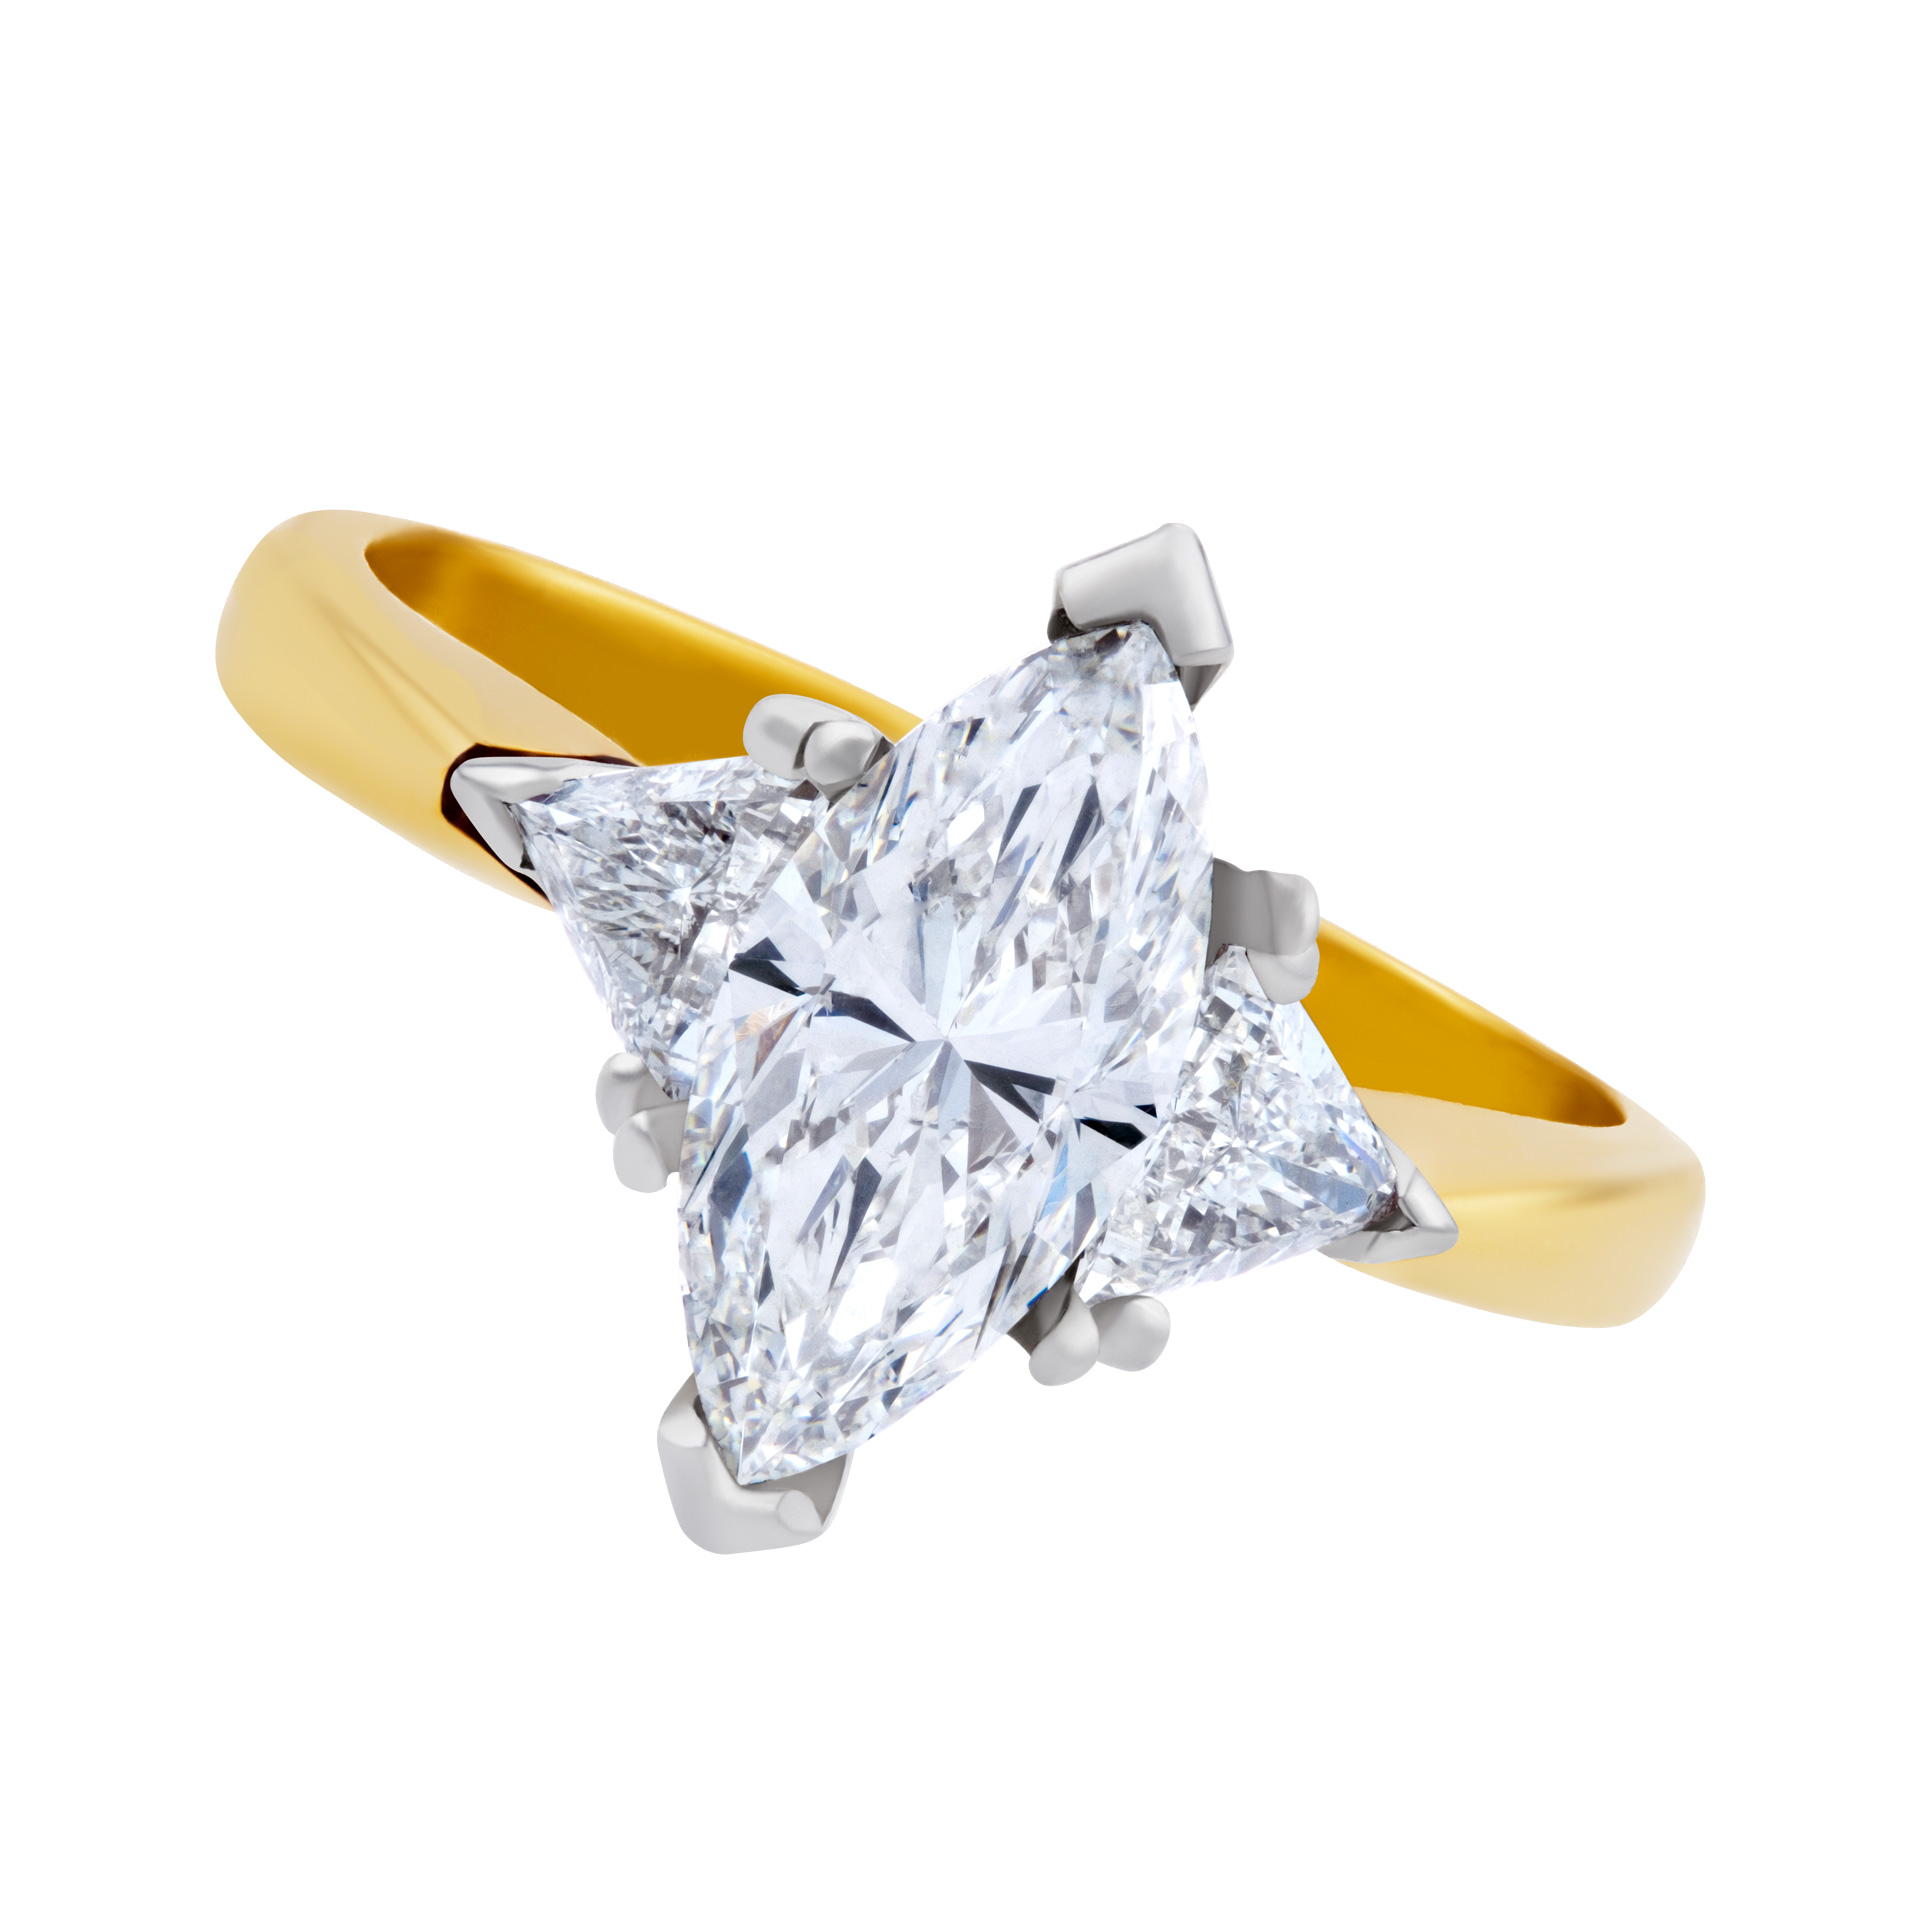 GIA Certified Diamond 1.30 cts (H color, SI2 clarity) ring set in 18k yellow gold.